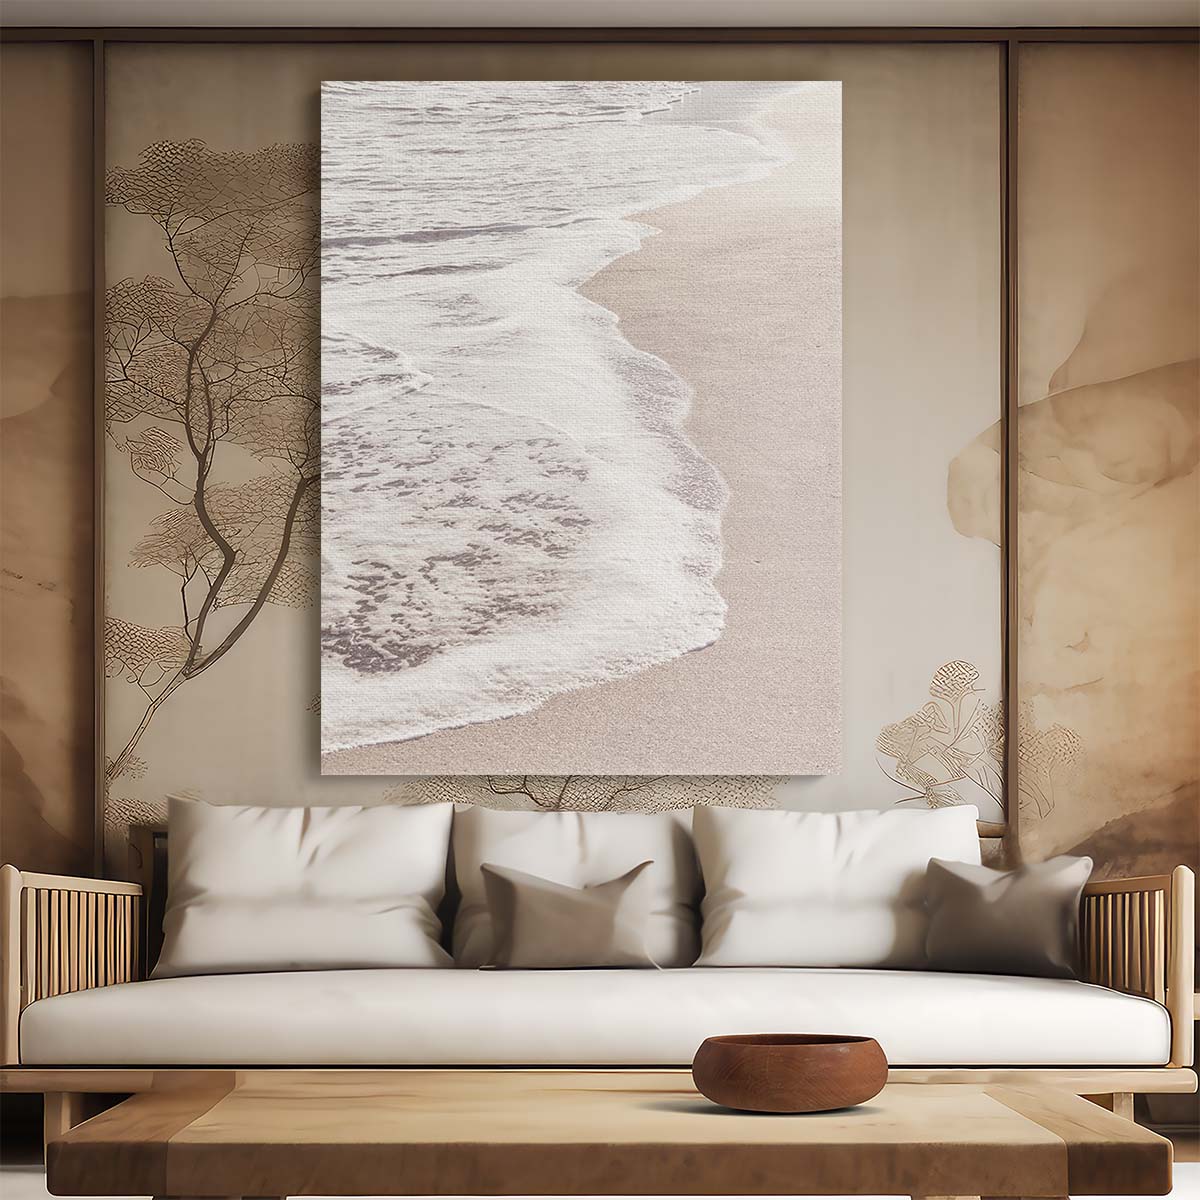 Minimalist Beige Beach Seascape Photography Wall Art by Luxuriance Designs, made in USA